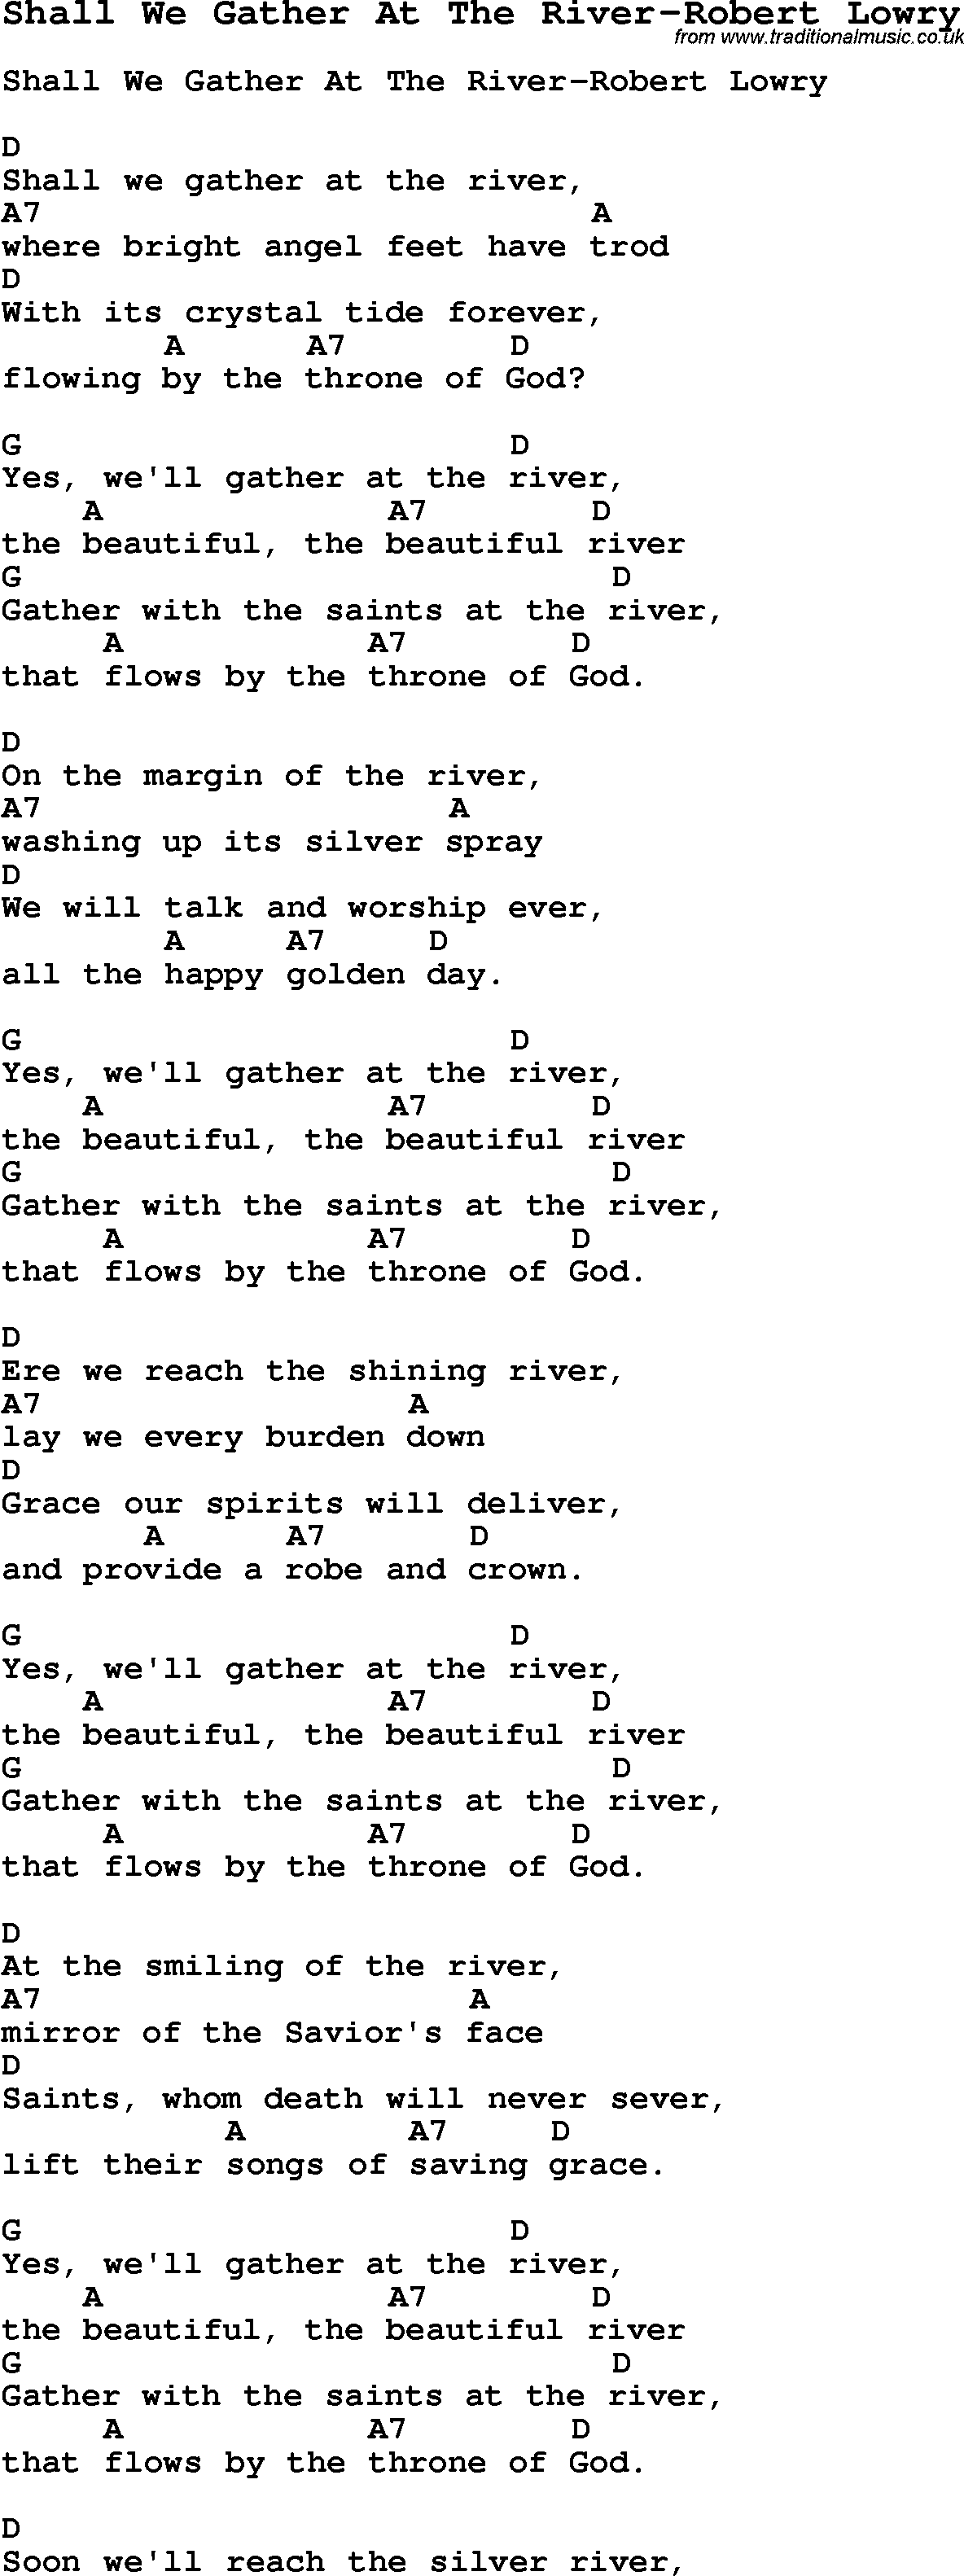 Summer-Camp Song, Shall We Gather At The River-Robert Lowry, with lyrics and chords for Ukulele, Guitar Banjo etc.